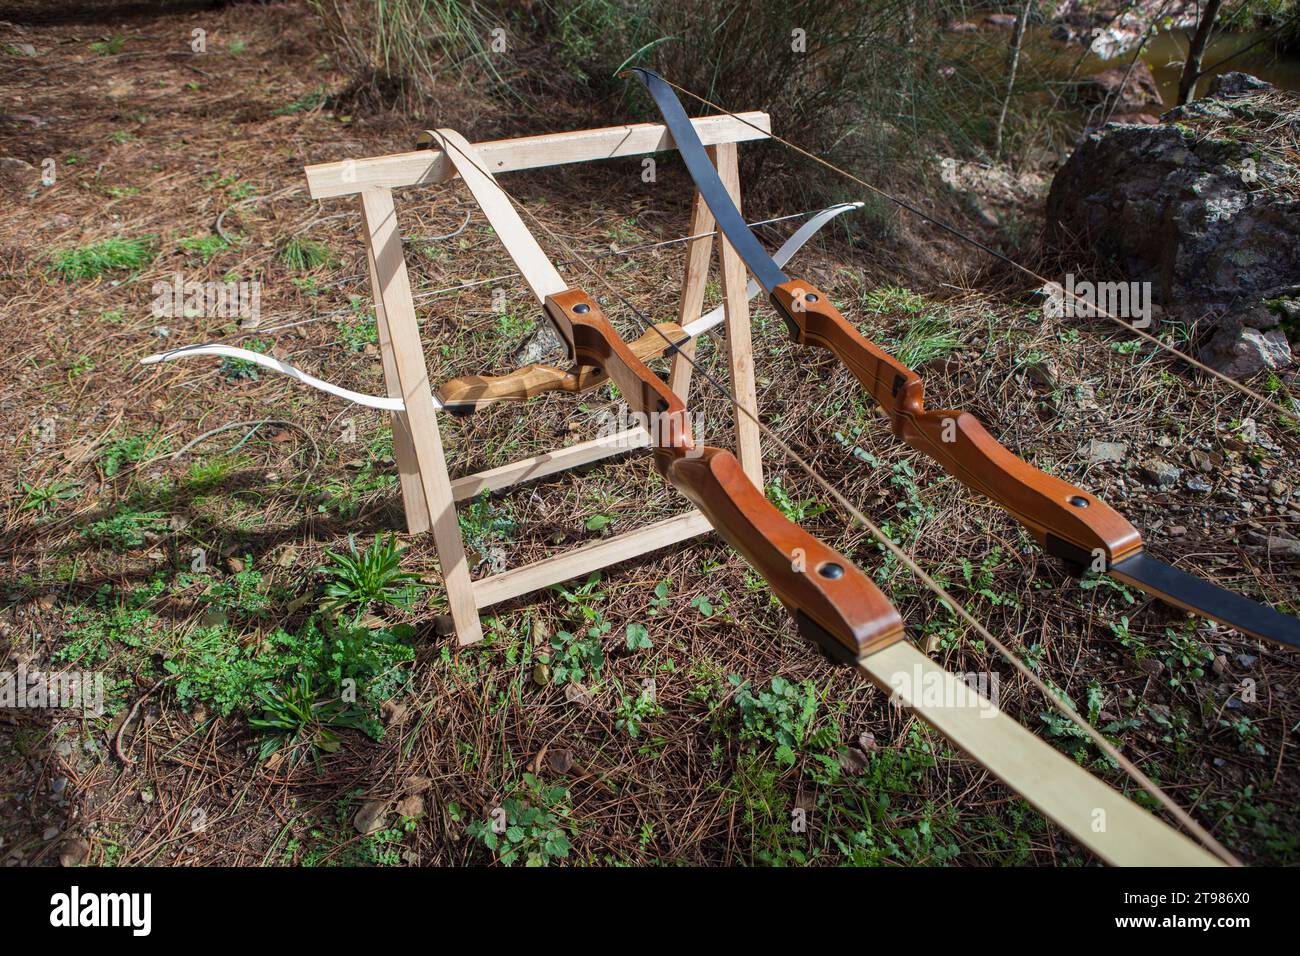 Wooden bows displayed over folding sawhorses. Forest background Stock Photo